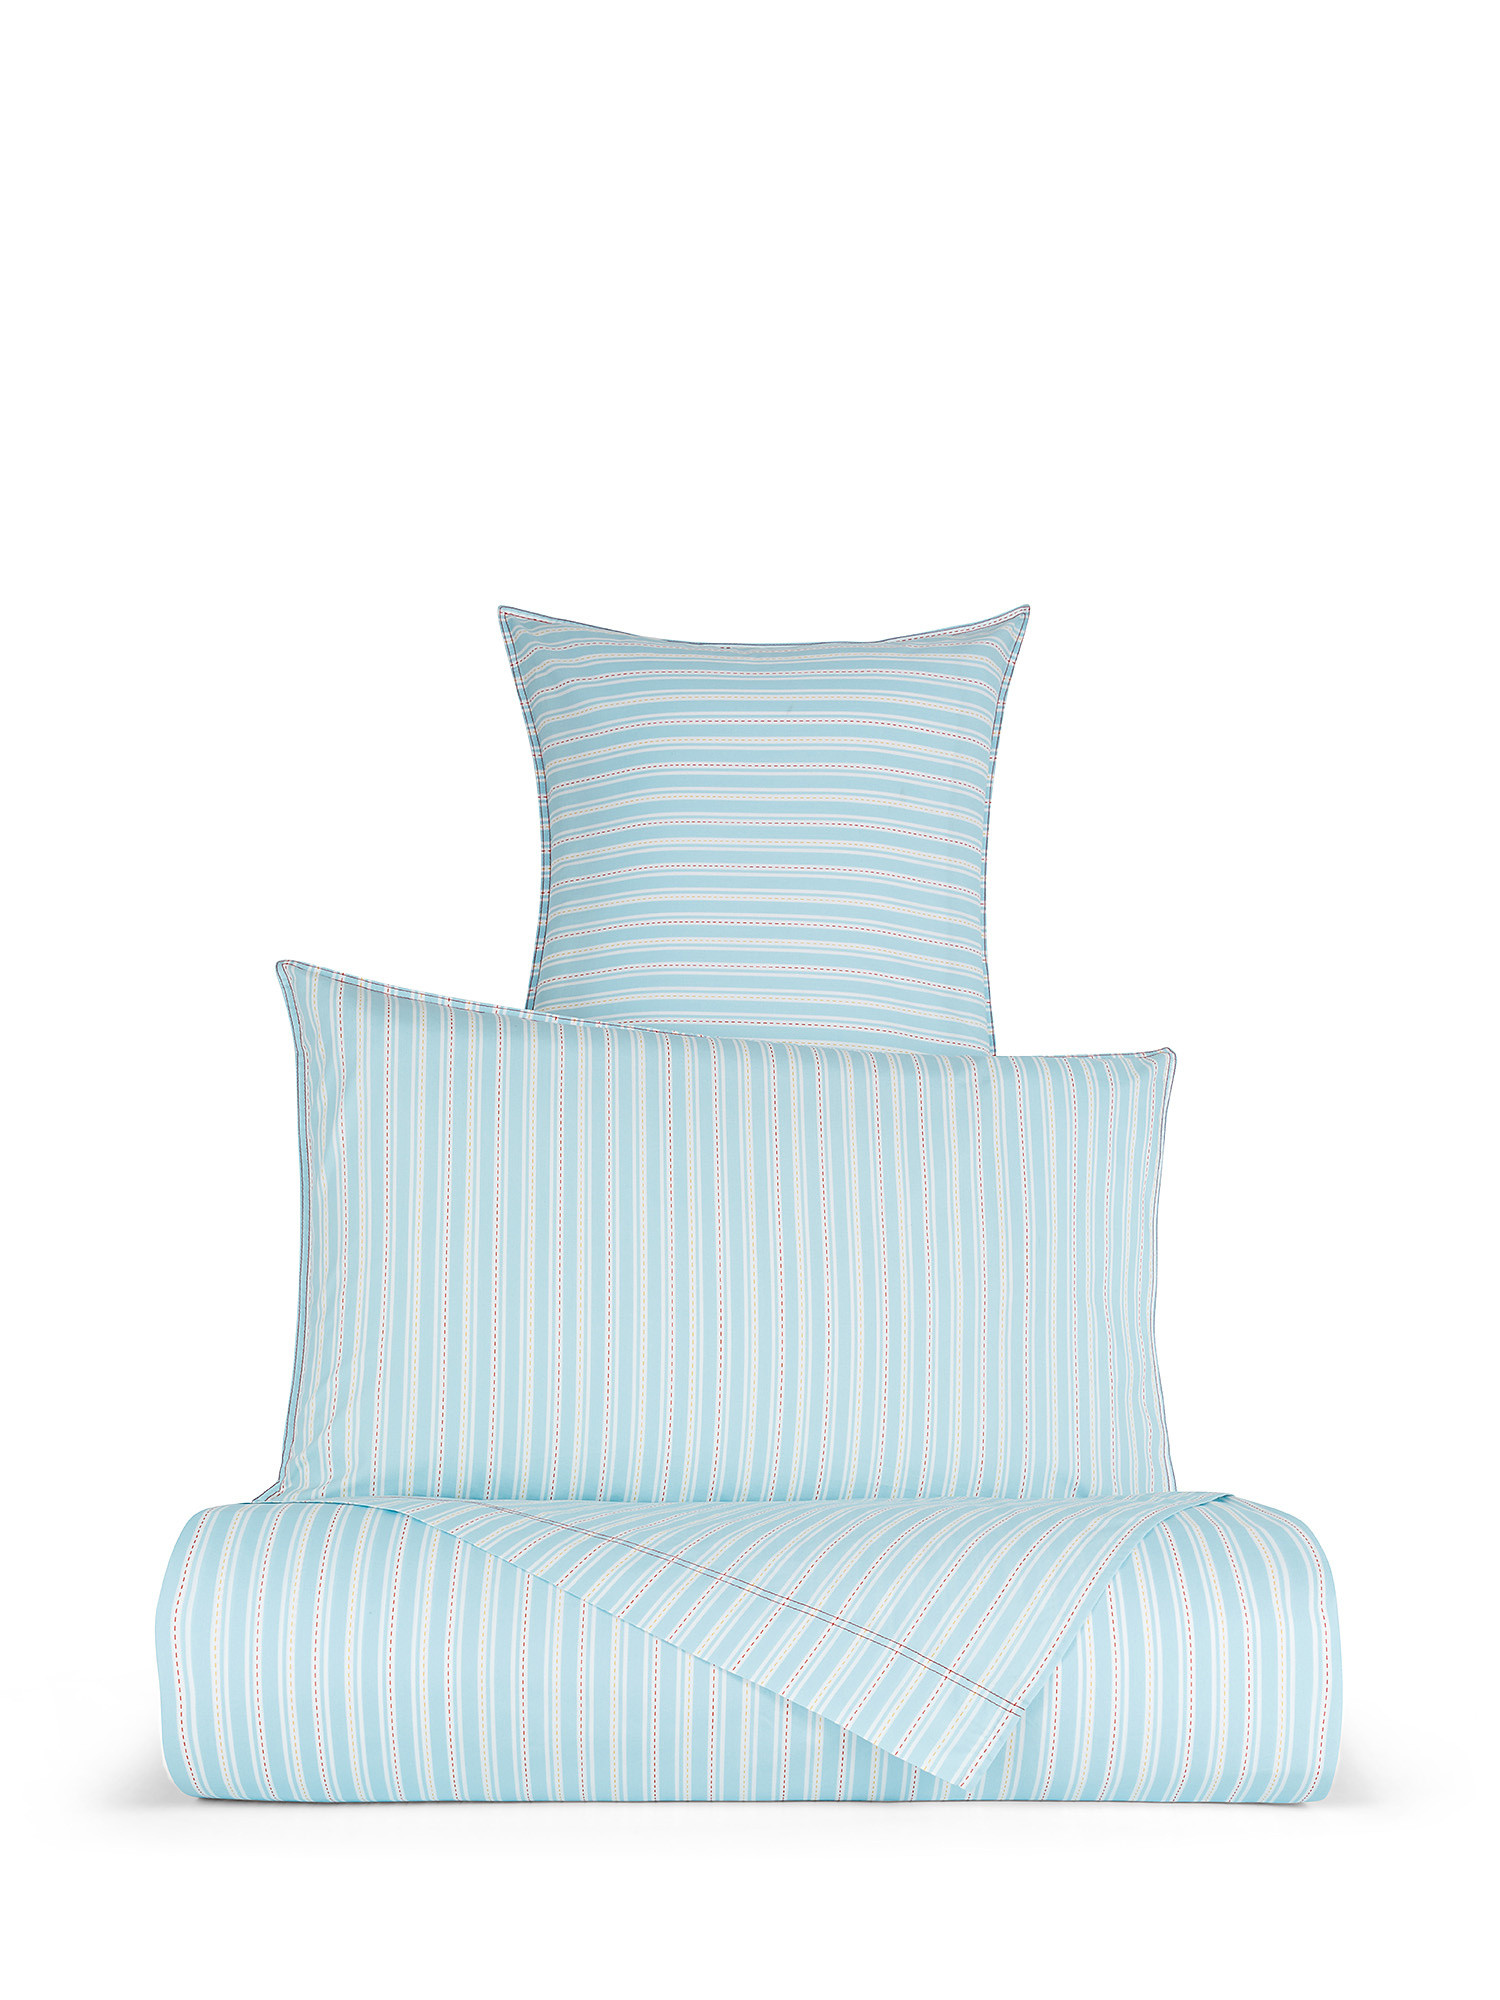 Striped patterned cotton percale pillowcase, Light Blue, large image number 1